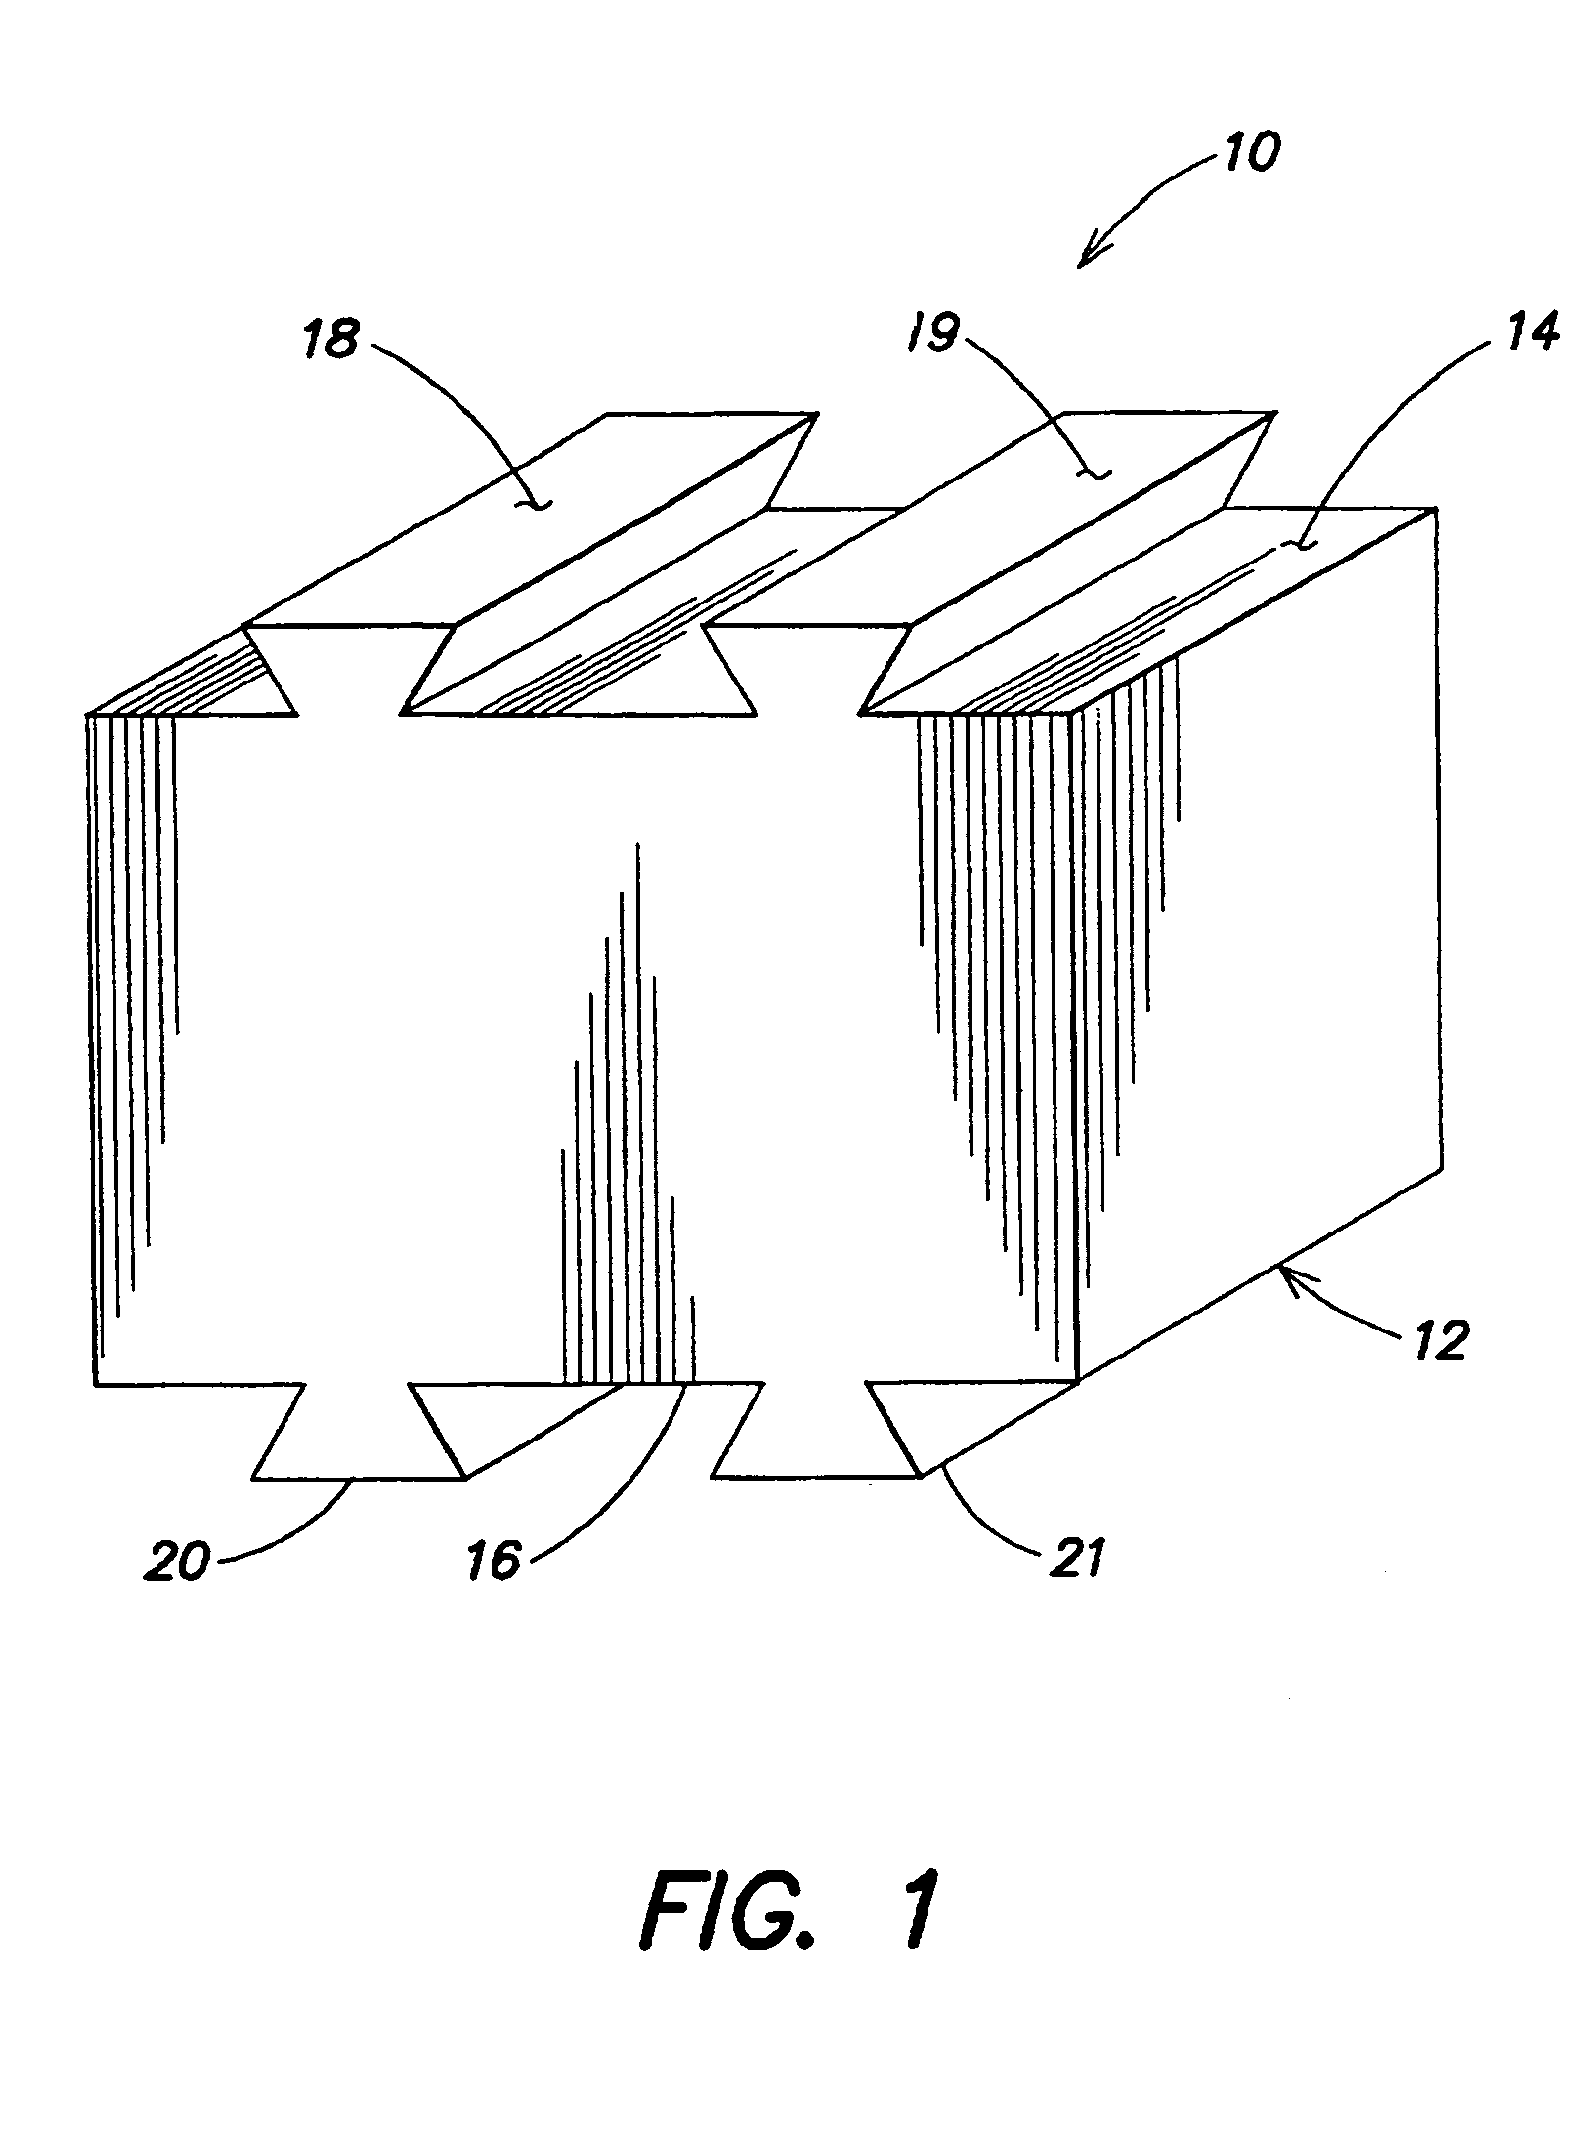 Method for graftless spinal fusion